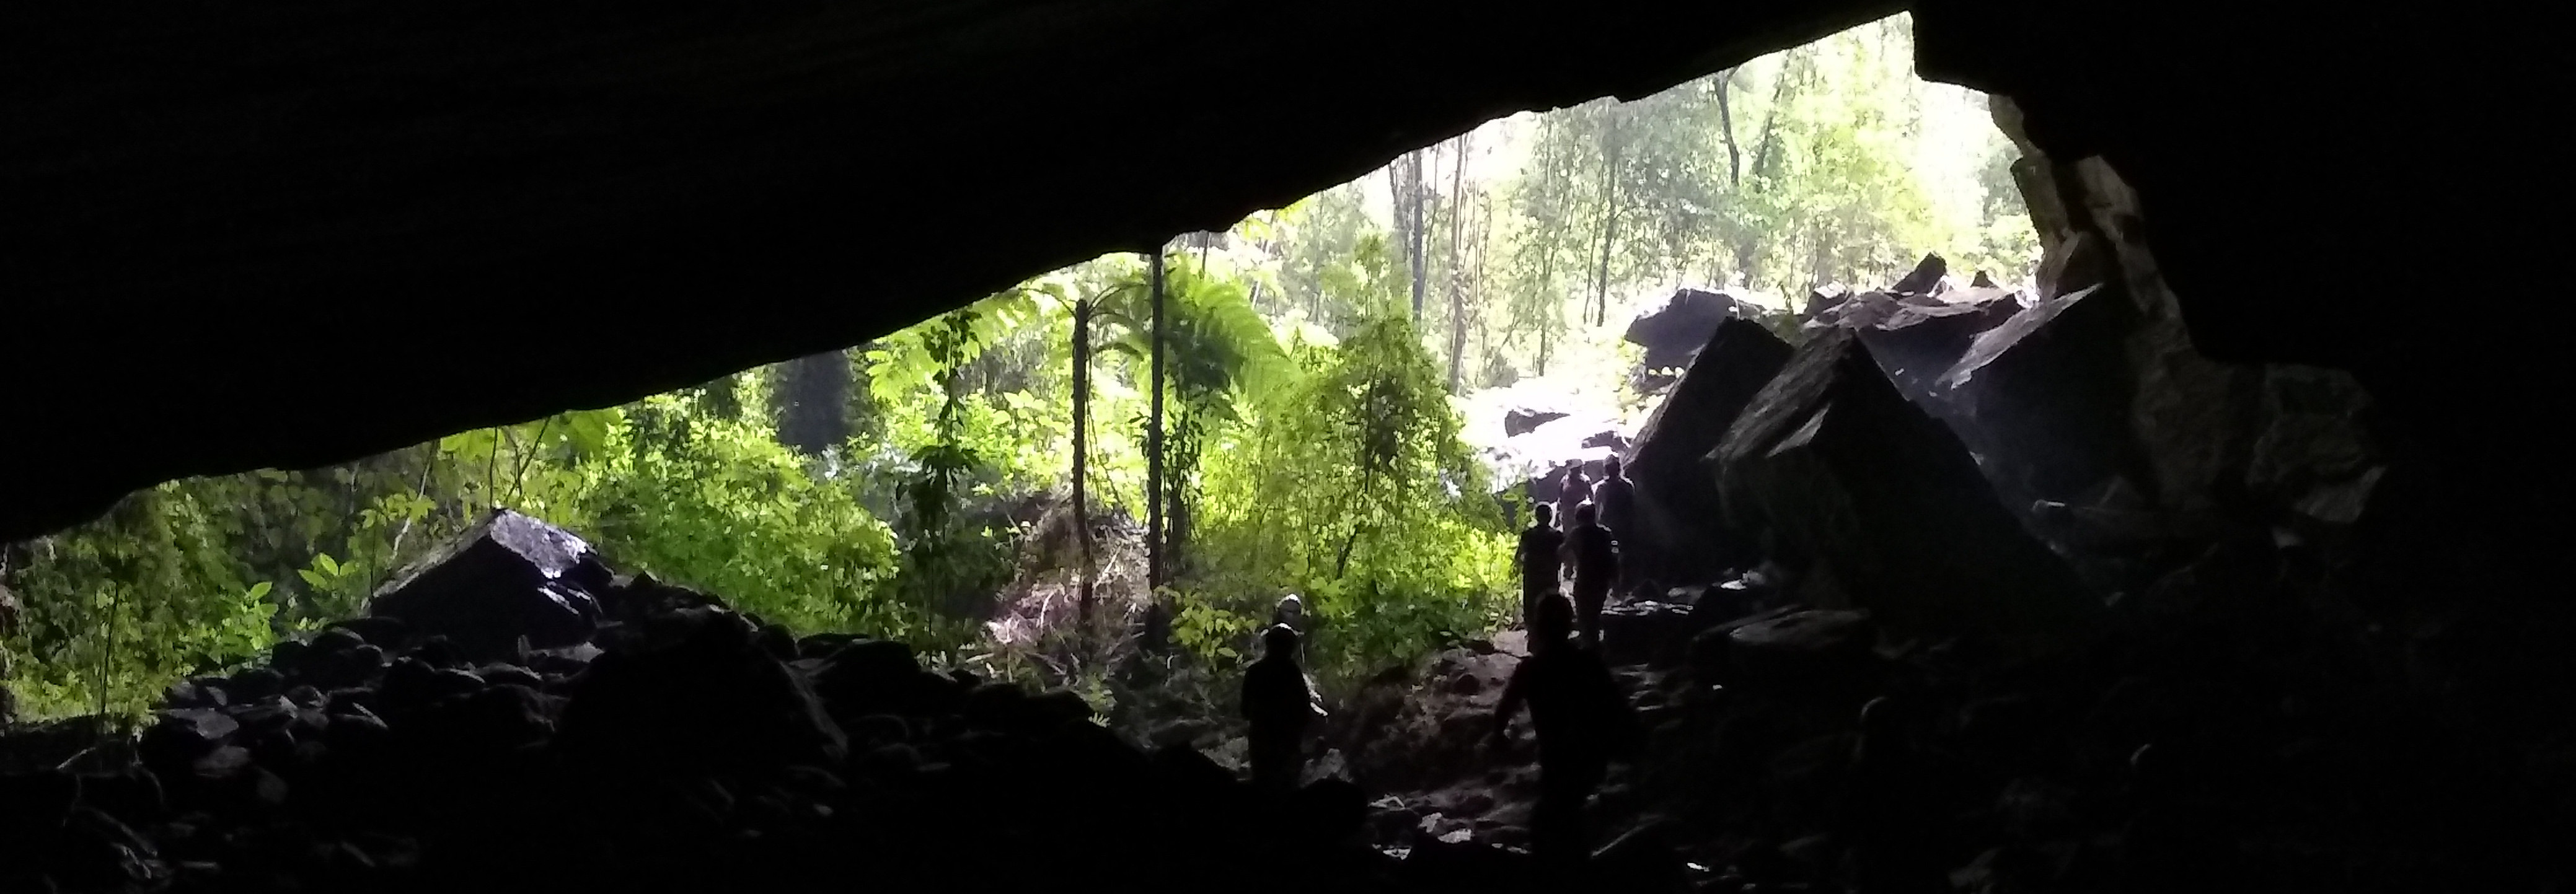 Shadowy cave entrance in southern Brazil